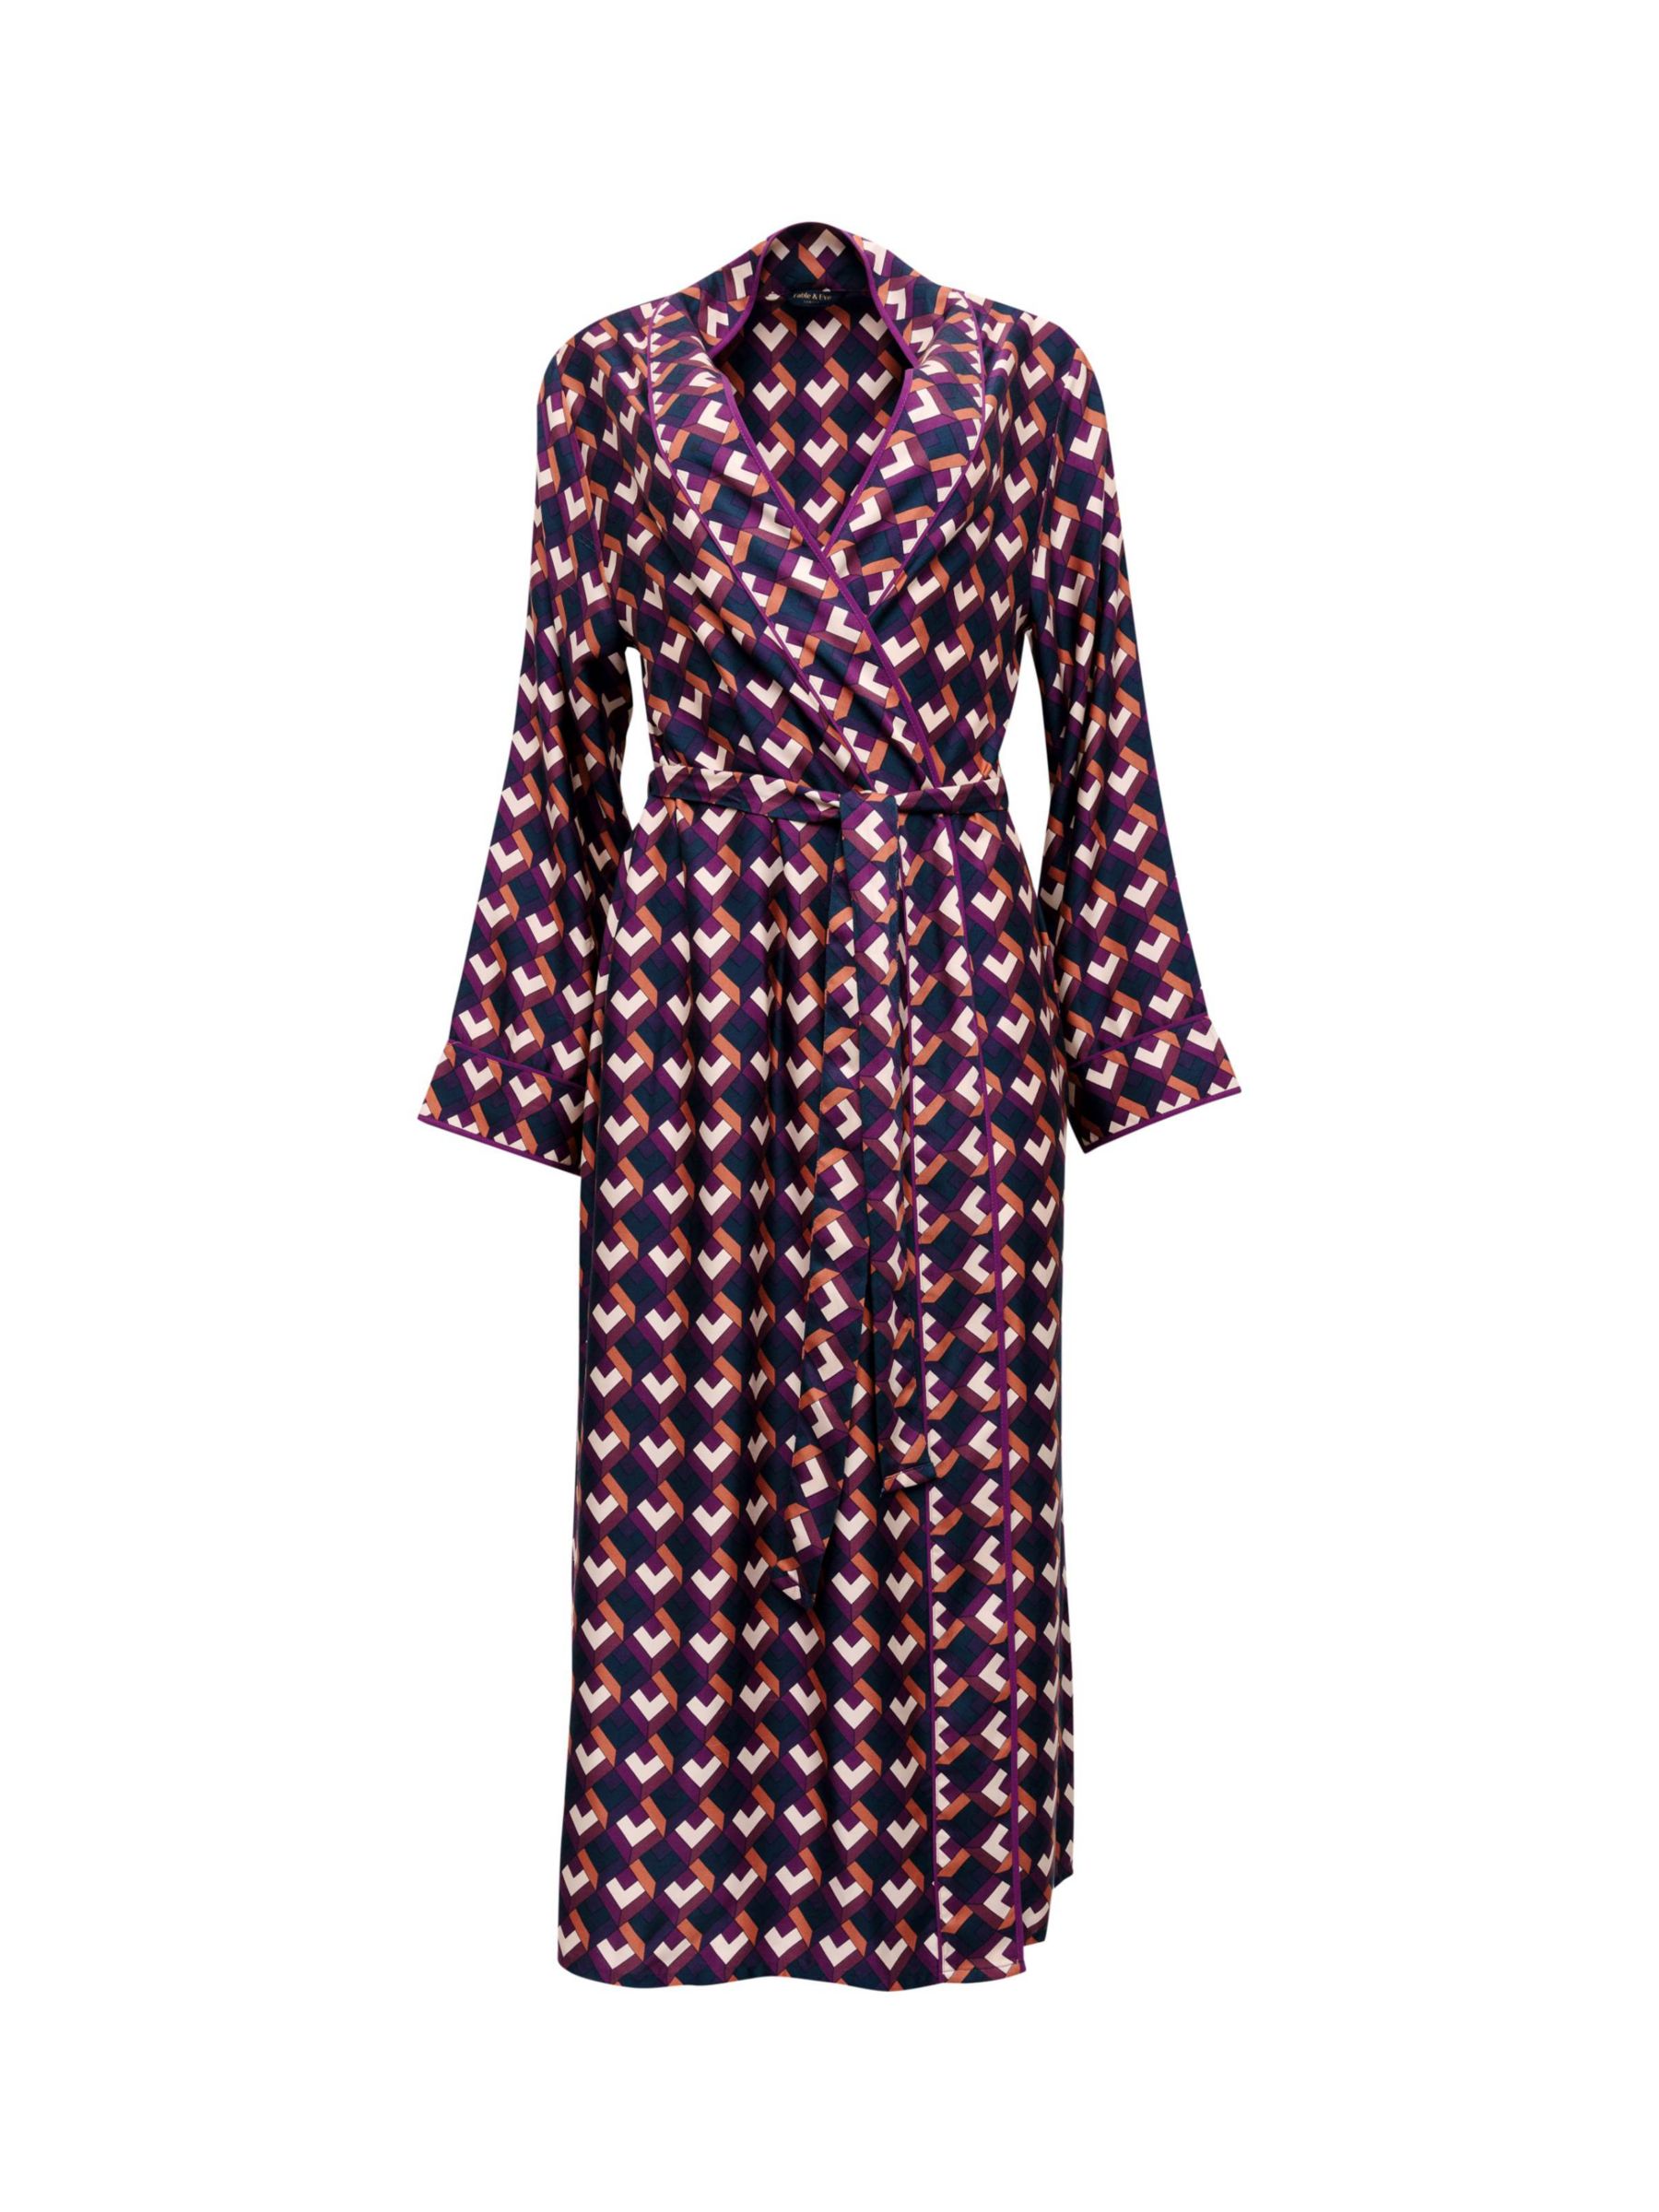 Fable & Eve Southbank Geo Print Long Dressing Gown, Navy, 16